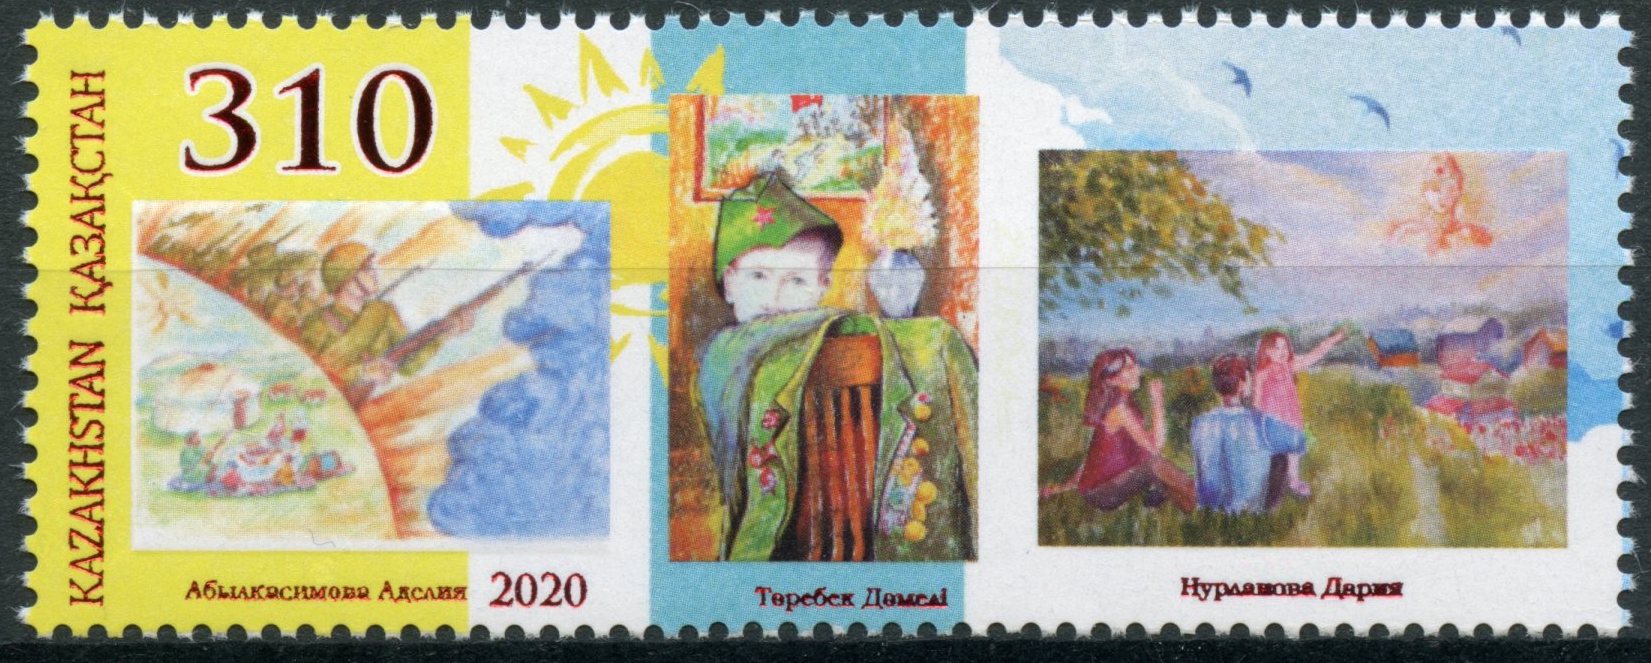 Kazakhstan 2020 MNH Military & War Stamps WWII WW2 Victory Day Children's Paintings 1v Set